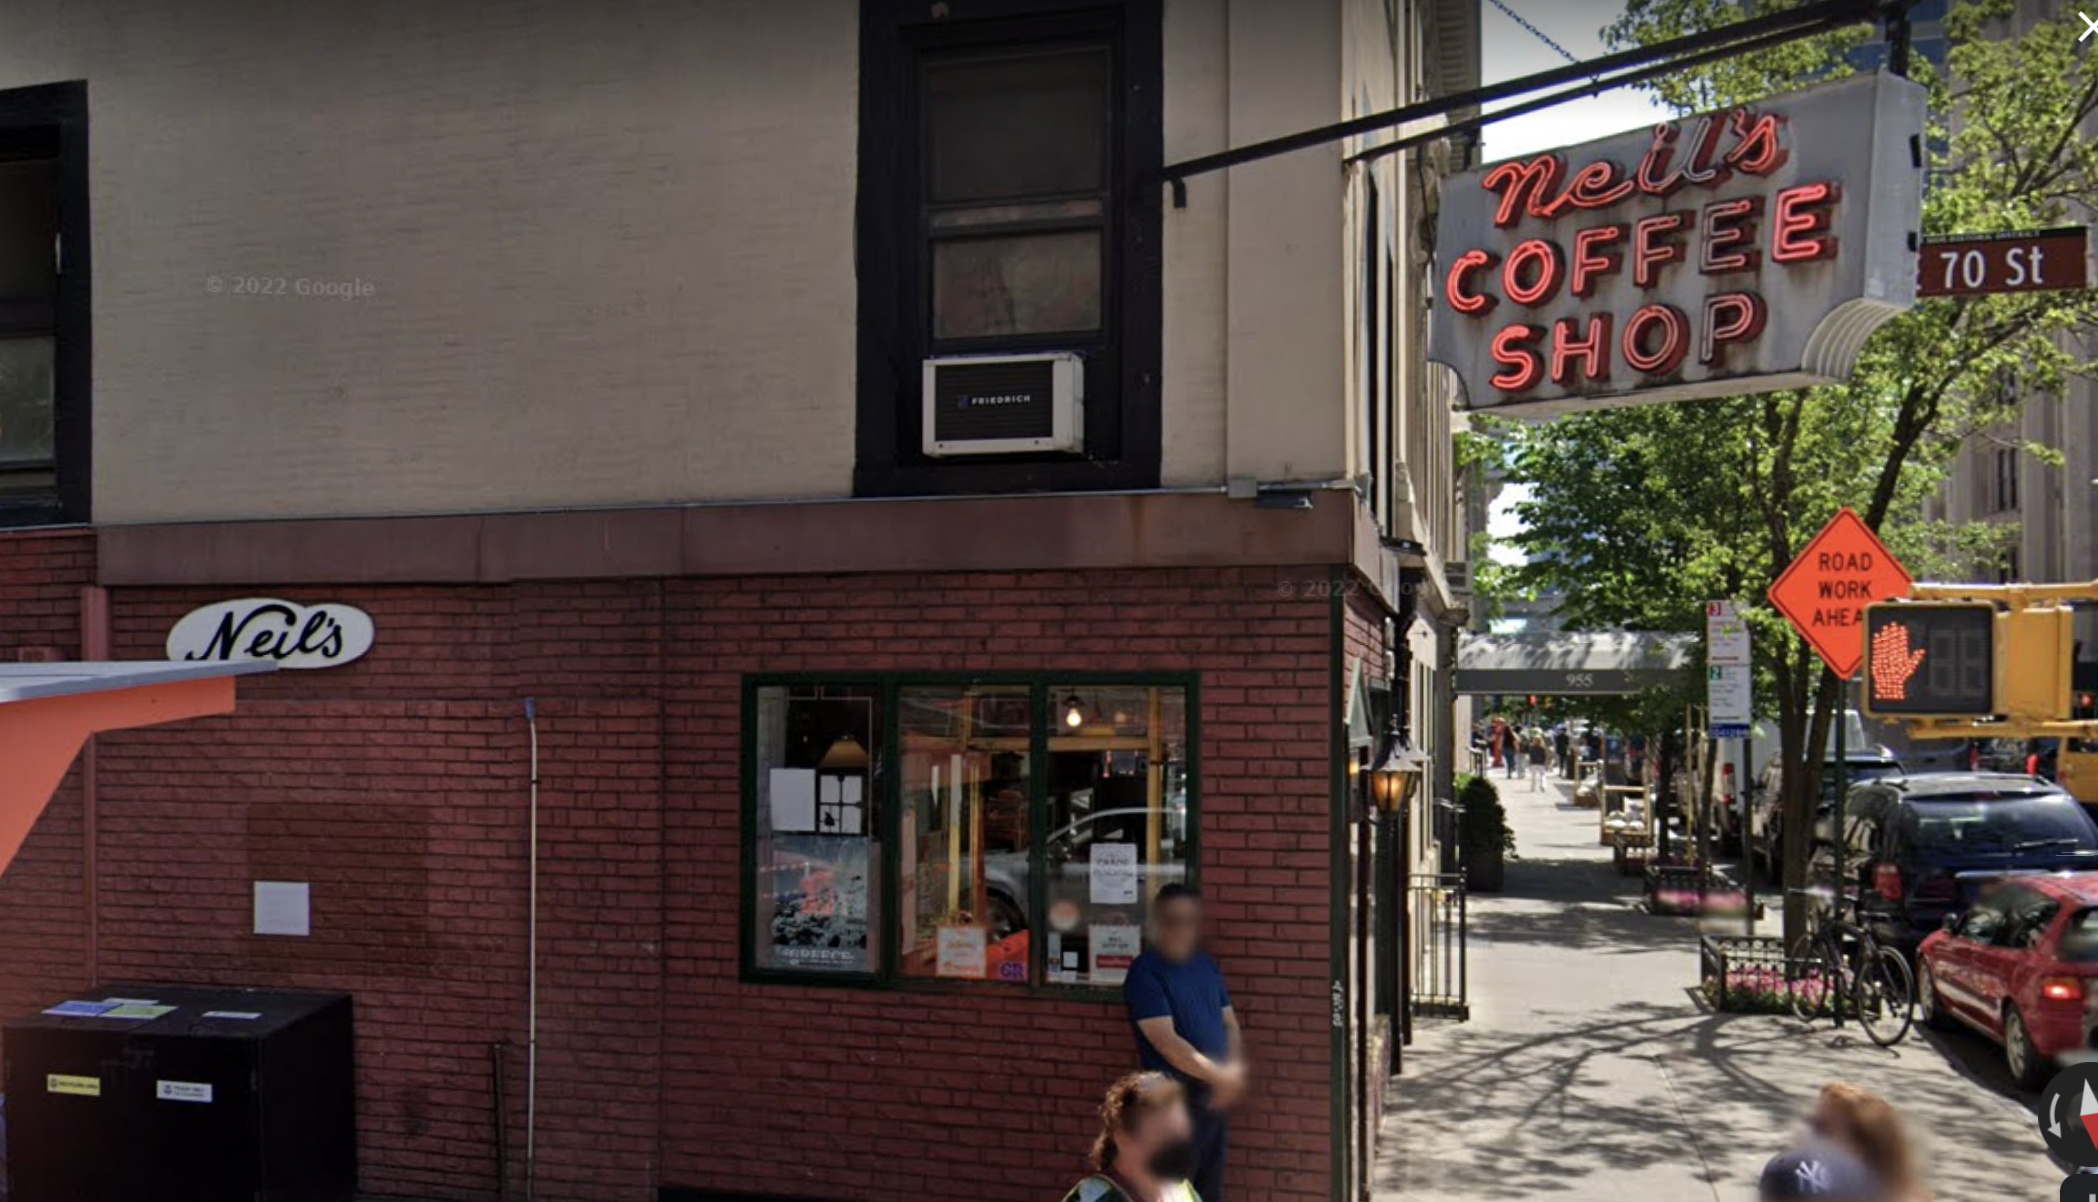 Neil’s Coffee Shop on the Upper East Side has closed.